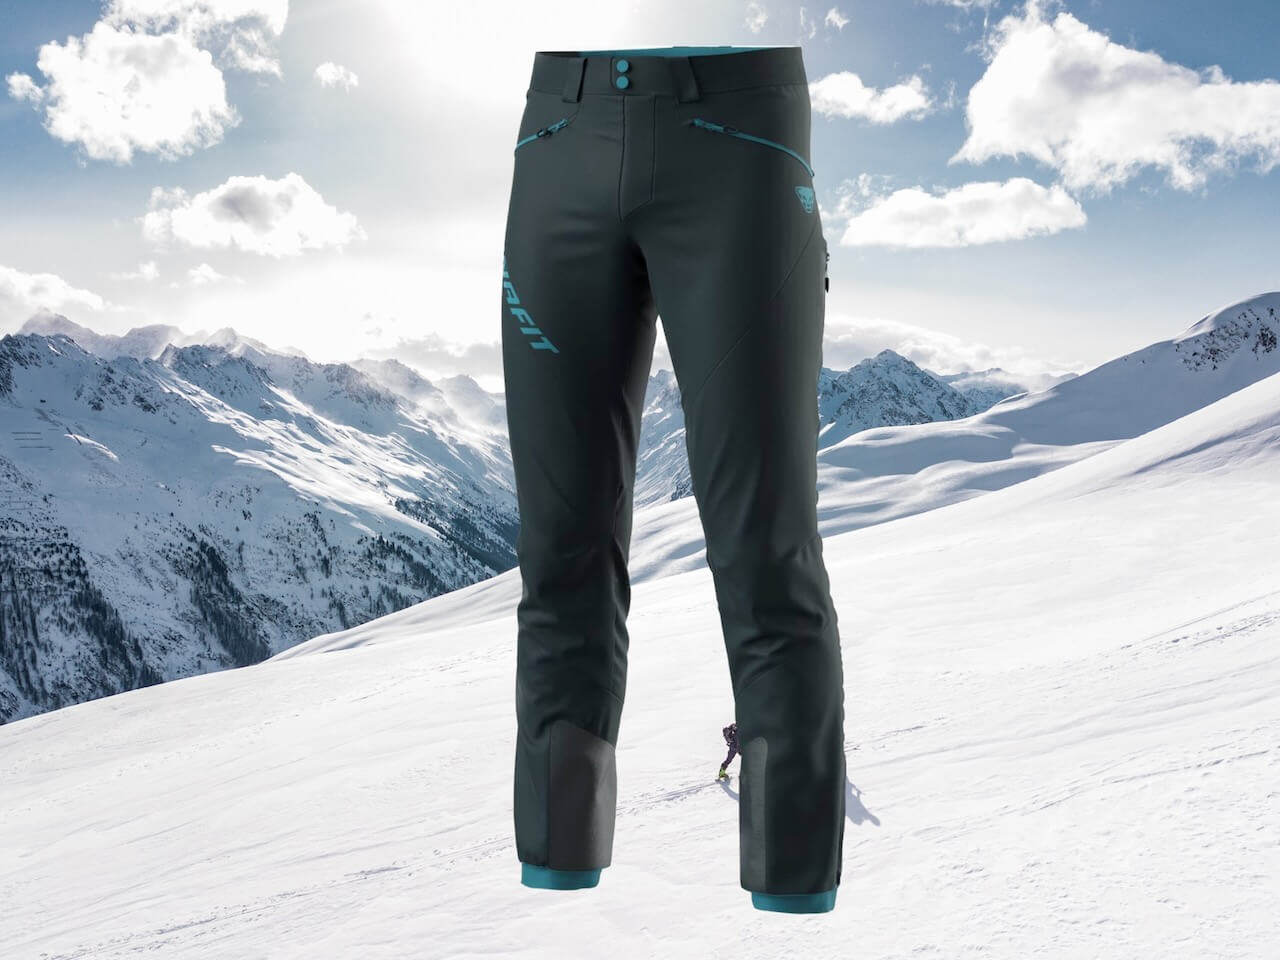 Featured image for “Test: Dynafit TLT Touring DST Pant”